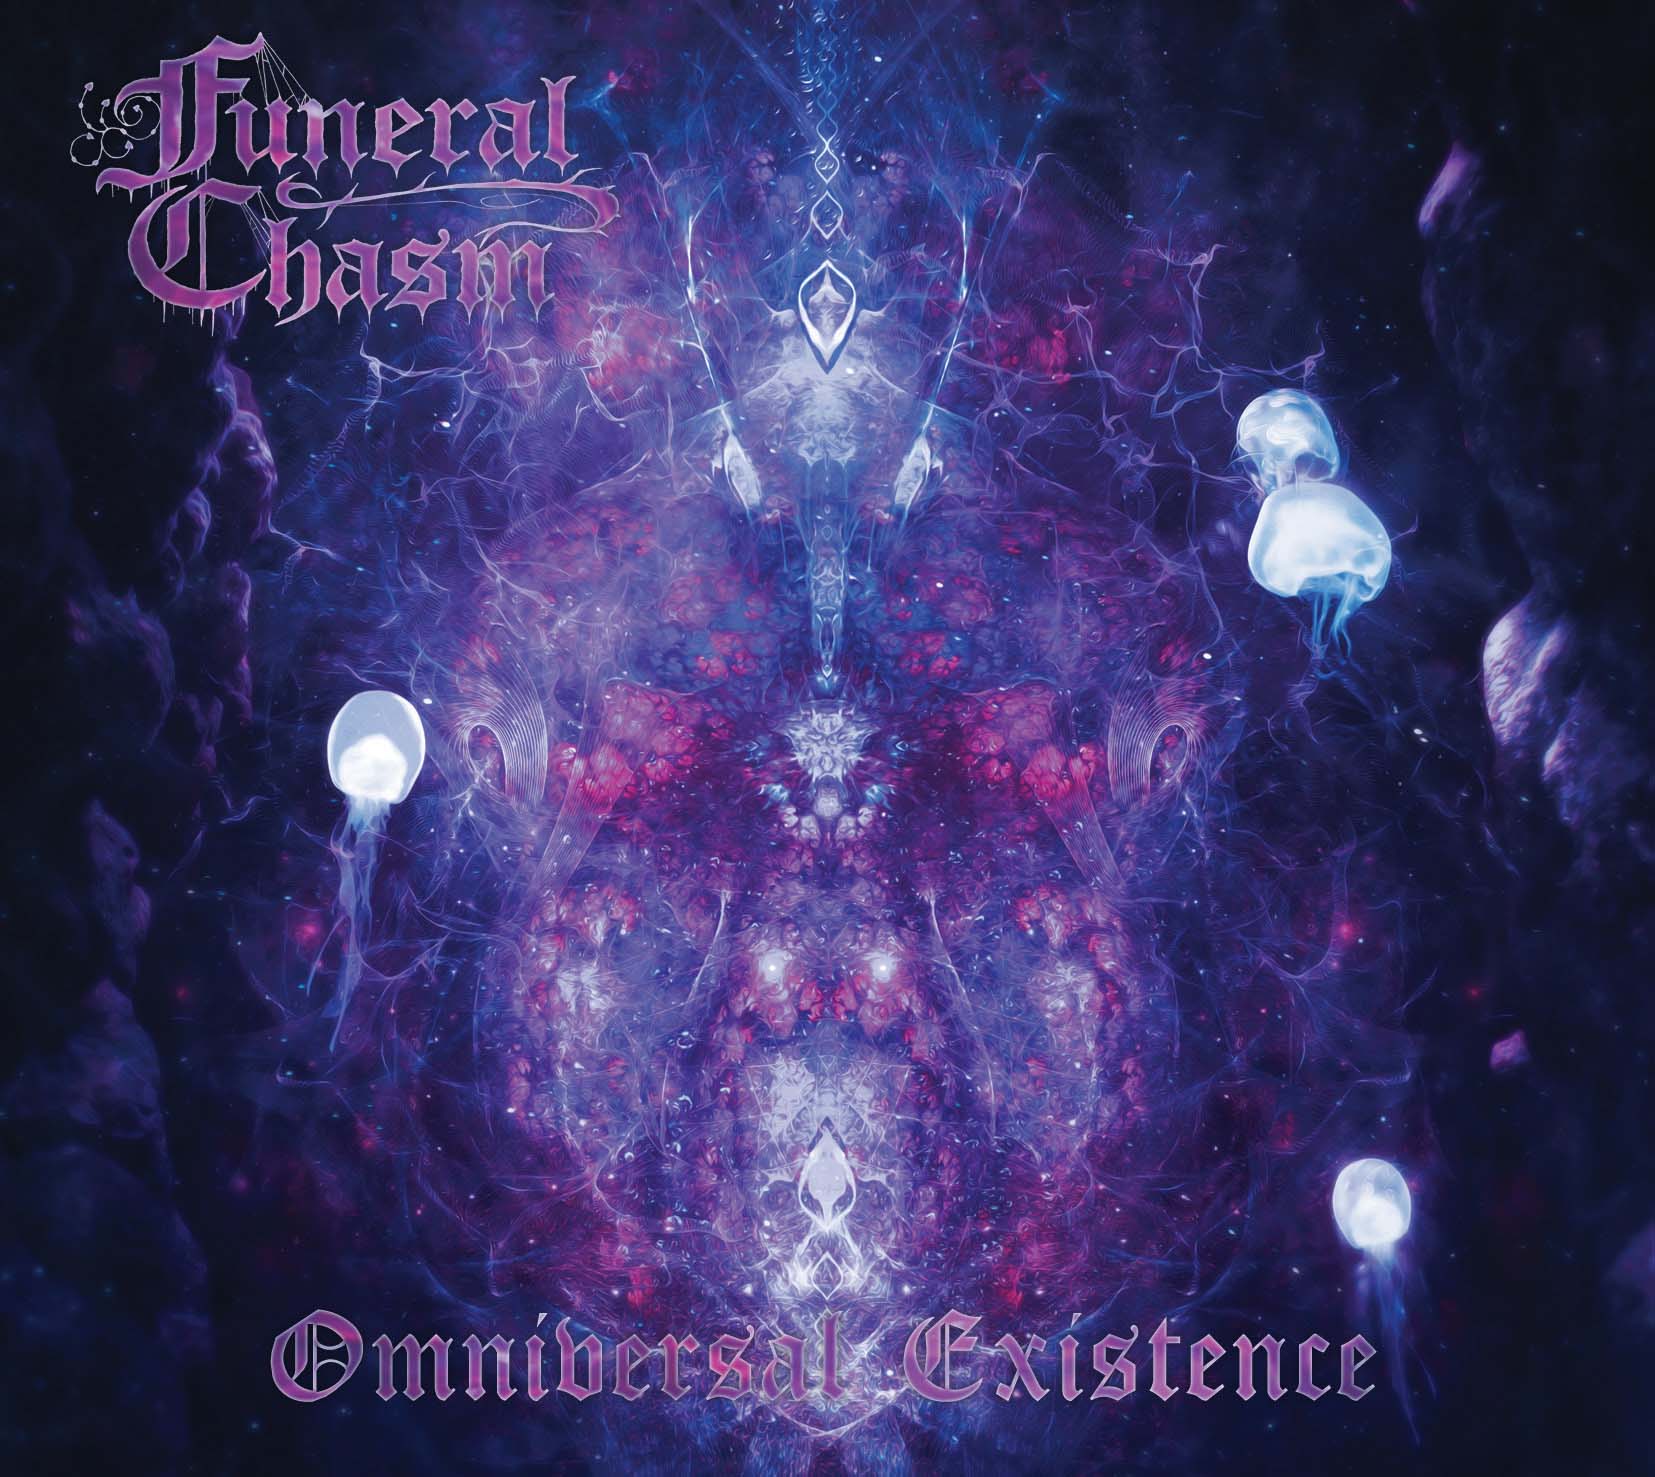 Funeral Chasm-Omniversal Existence